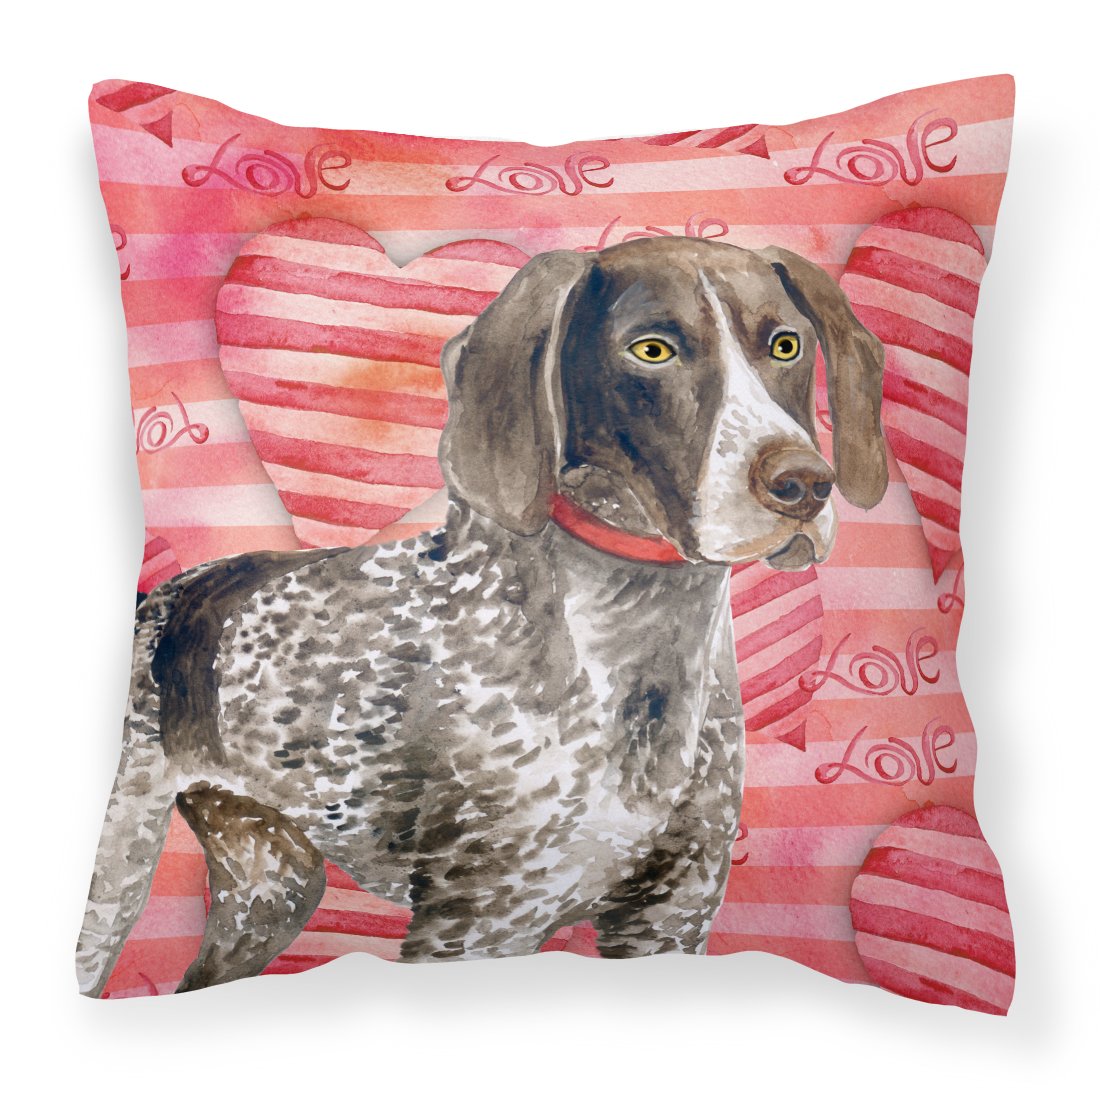 German Shorthaired Pointer Love Fabric Decorative Pillow BB9728PW1818 by Caroline's Treasures